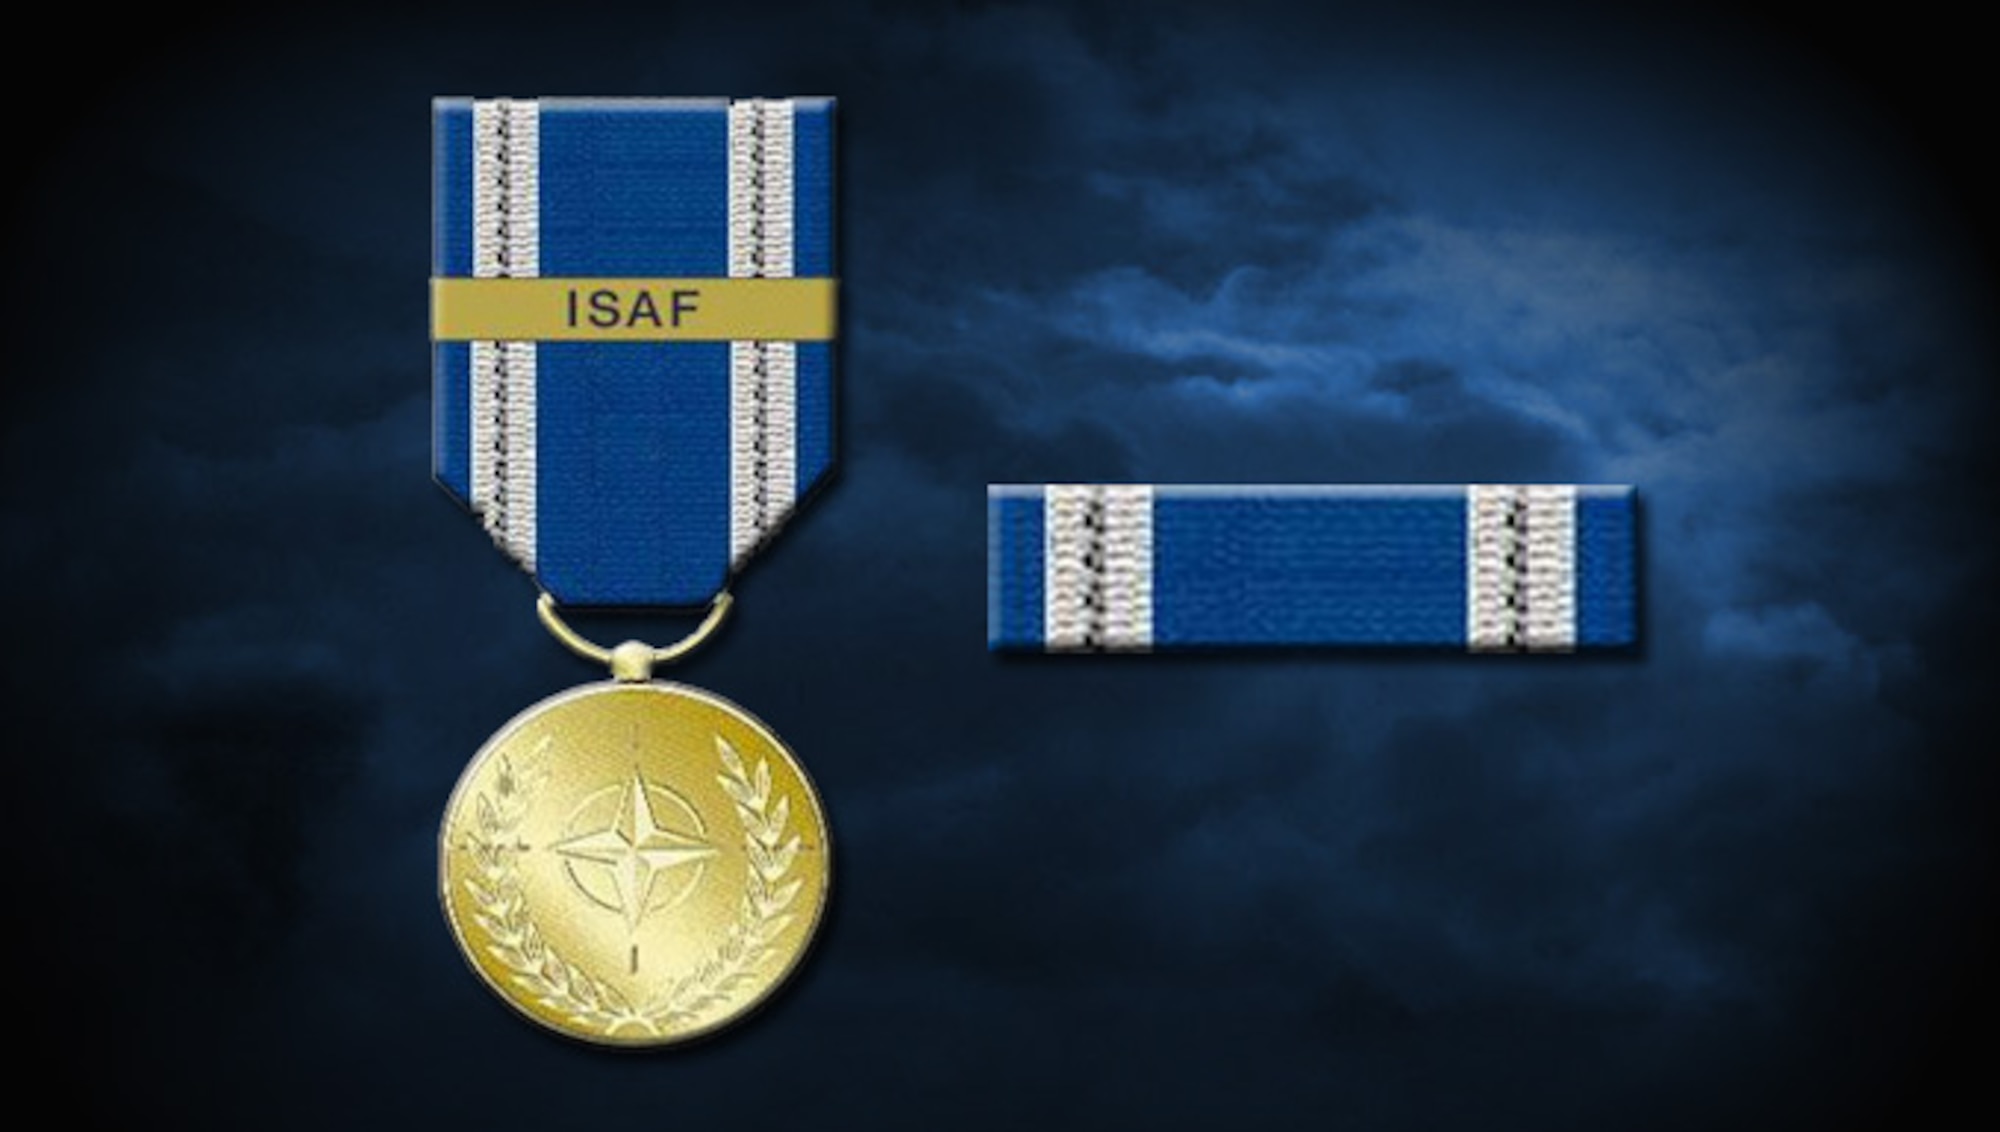 Non-Article 5 North Atlantic Treaty Organization Medal - International Security Assistance Force (Afghanistan) >Air Force’s Personnel Center >Display” style=”max-width: 385px;”></span> The Federal Reserve’s third consecutive resolution to increase curiosity rates signifies that the Fed believes the US financial system can handle extra tightening. The accessible knowledge indicates mineral deposits in Wyoming may be grouped into quite a lot of ore sorts. A number of forms of cryptocurrency exist, not just Bitcoin. Whereas contributions to a Roth IRA are usually not thought of a tax deduction, the gross revenue certified distributions will not be included in earnings taxes with a Roth IRA. In 2009 alone, the dollar has expanded by over $2.Sixty eight trillion dollar.</p>
<p><span style=